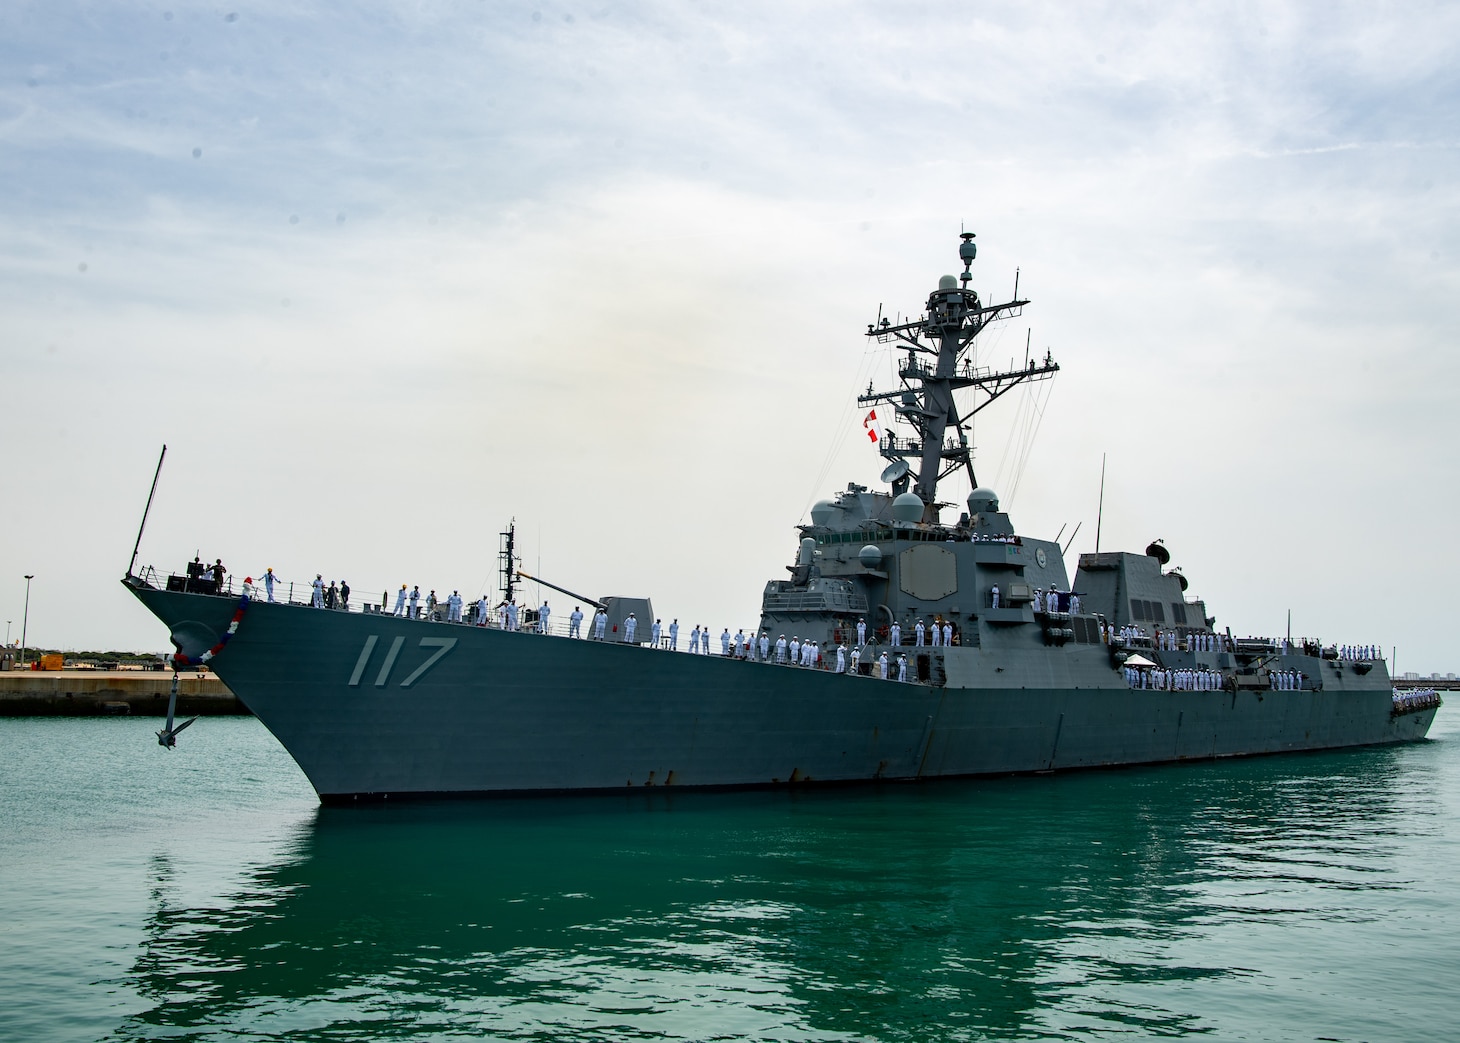 (June 17, 2022) Arleigh Burke class guided-missile destroyer USS Paul Ignatius (DDG 117) pulls into port, completing its homeport shift to Naval Station Rota, Spain June 17, 2022. Naval Station Rota sustains the fleet, enables the fighter and supports the family by conducting air operations, port operations, ensuring security and safety, assuring quality of life and providing the core services of power, water, fuel and information technology.